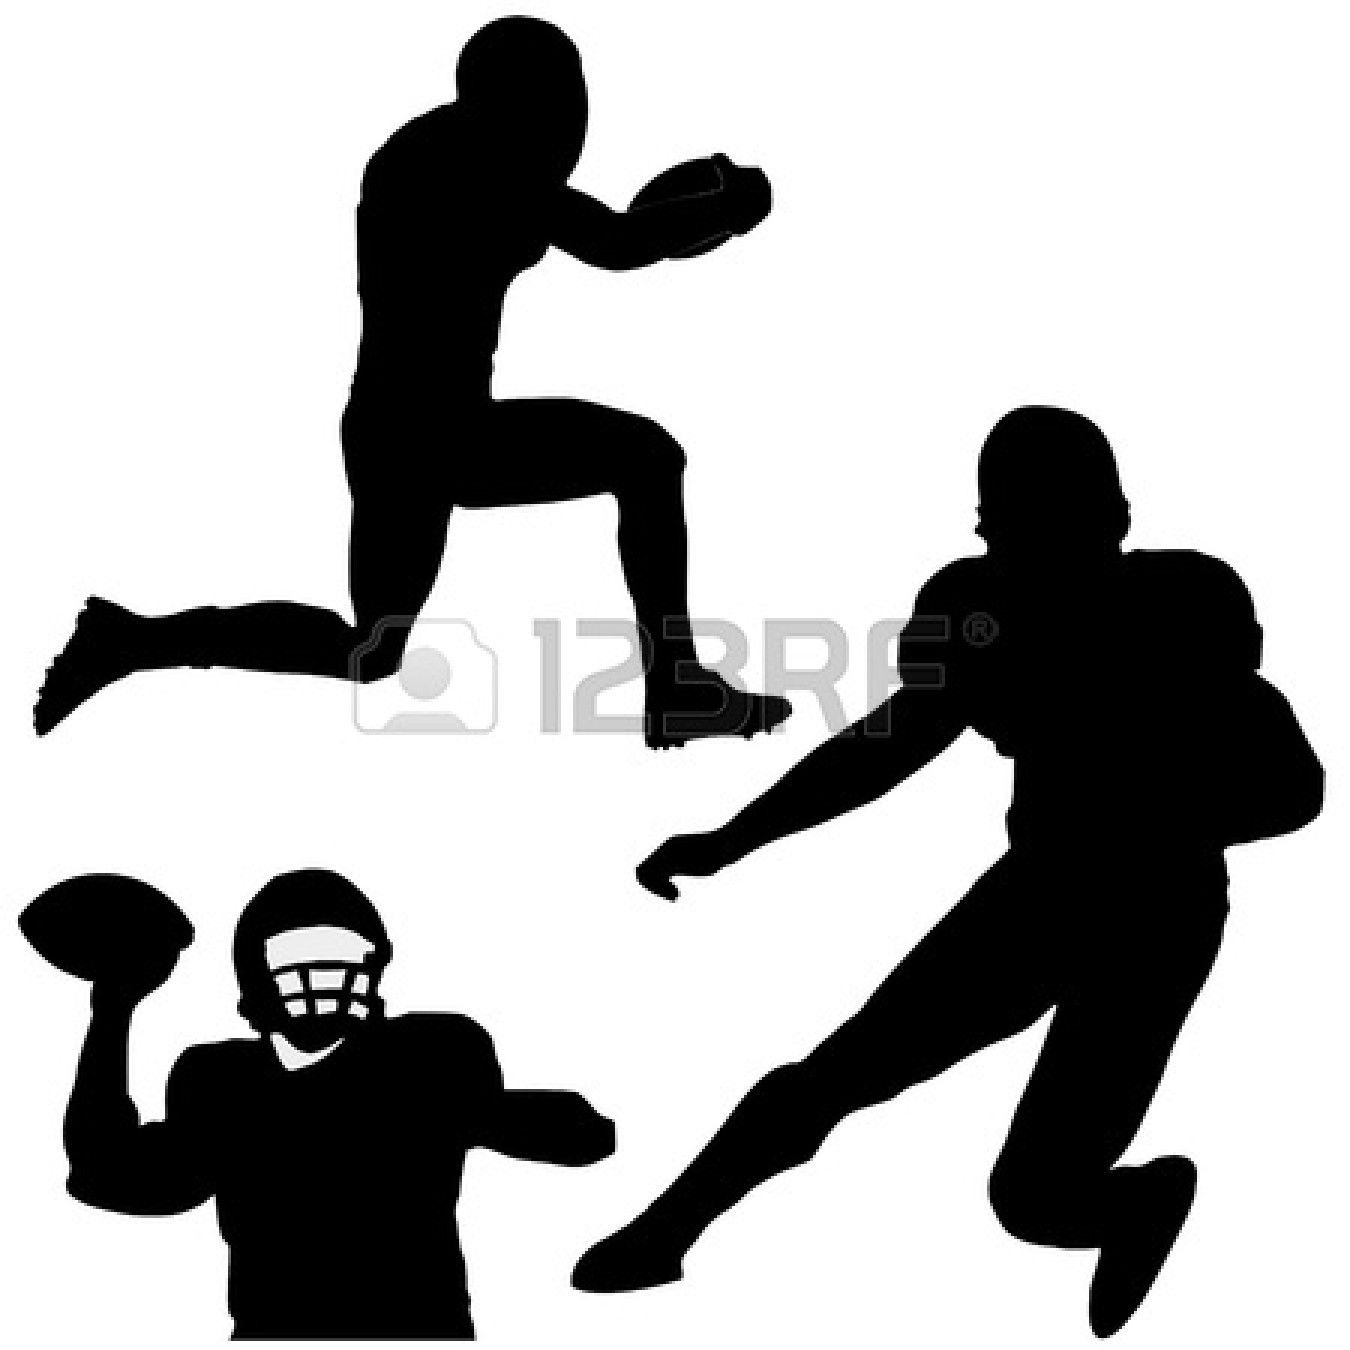 American Football Player Clipart   Clipart Panda   Free Clipart Images